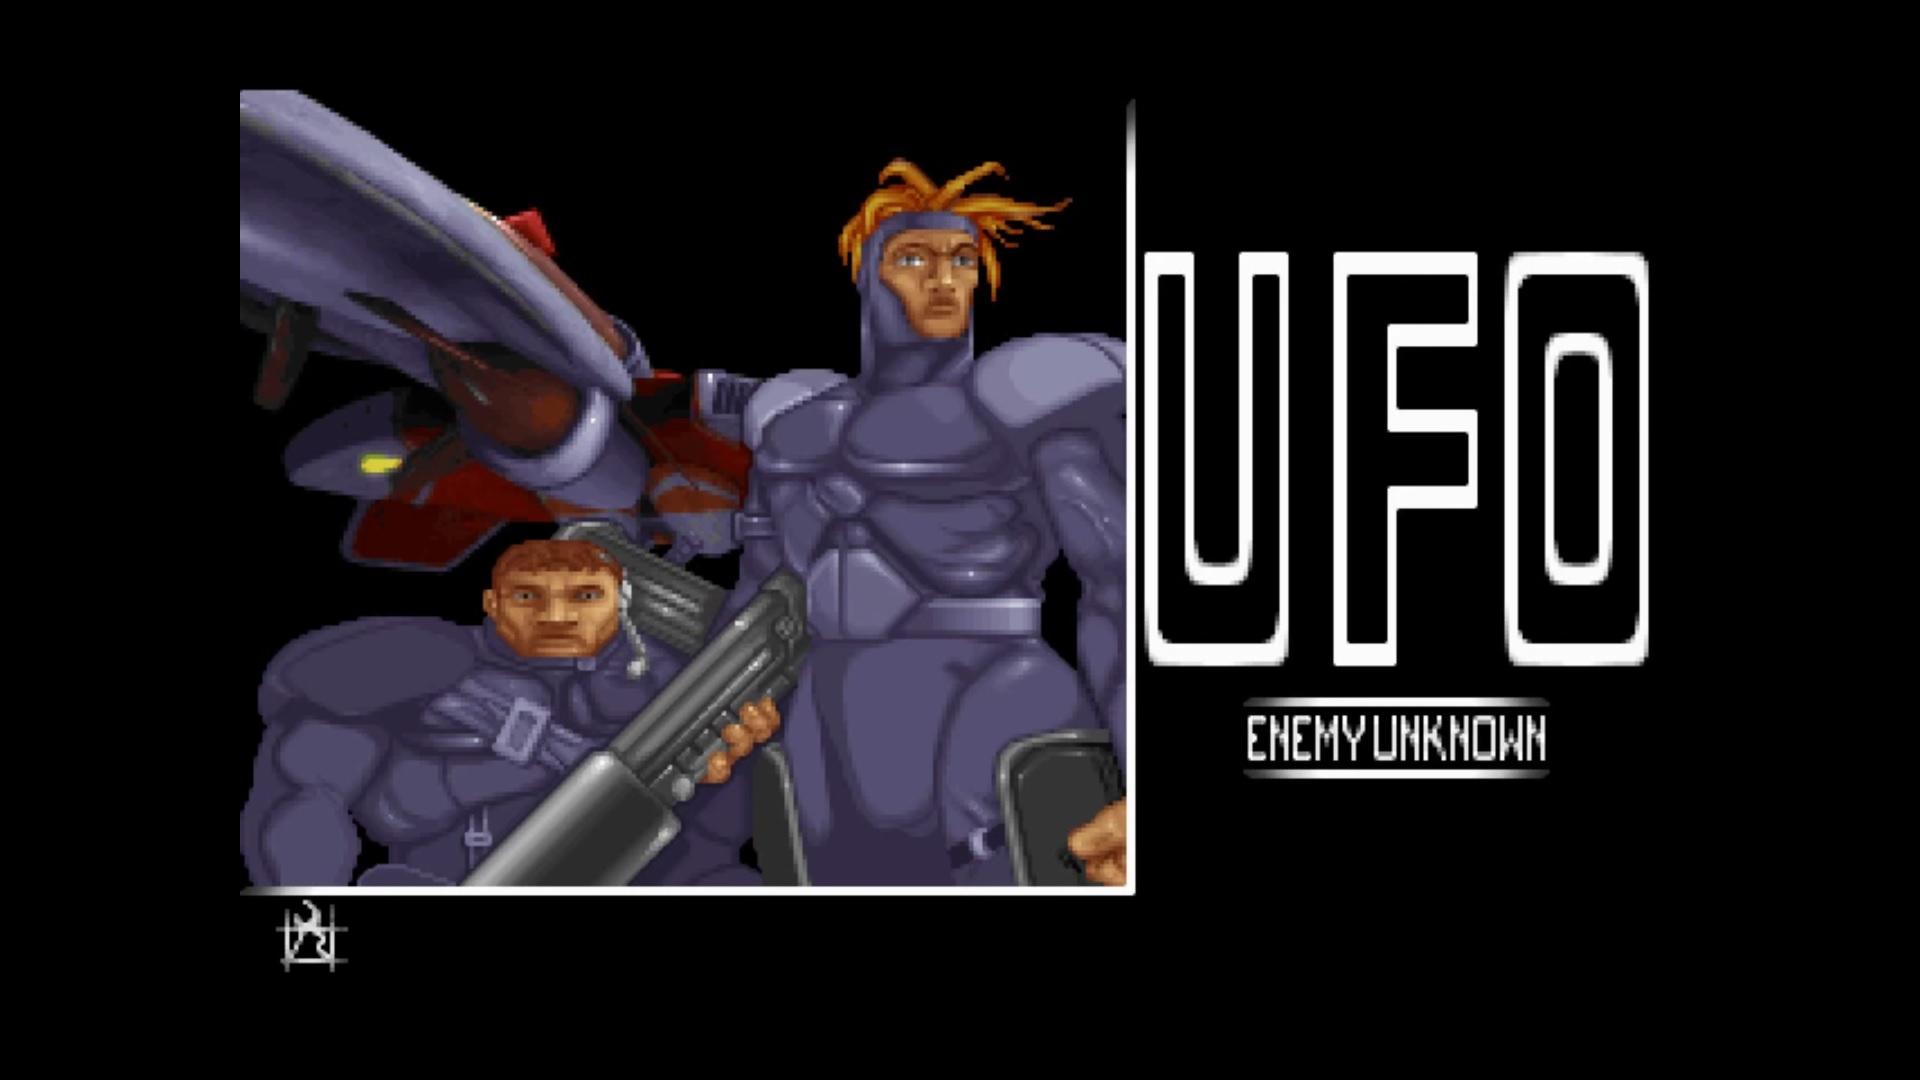 The Original X COM: UFO DEFENSE Is Free To Download For Today Only